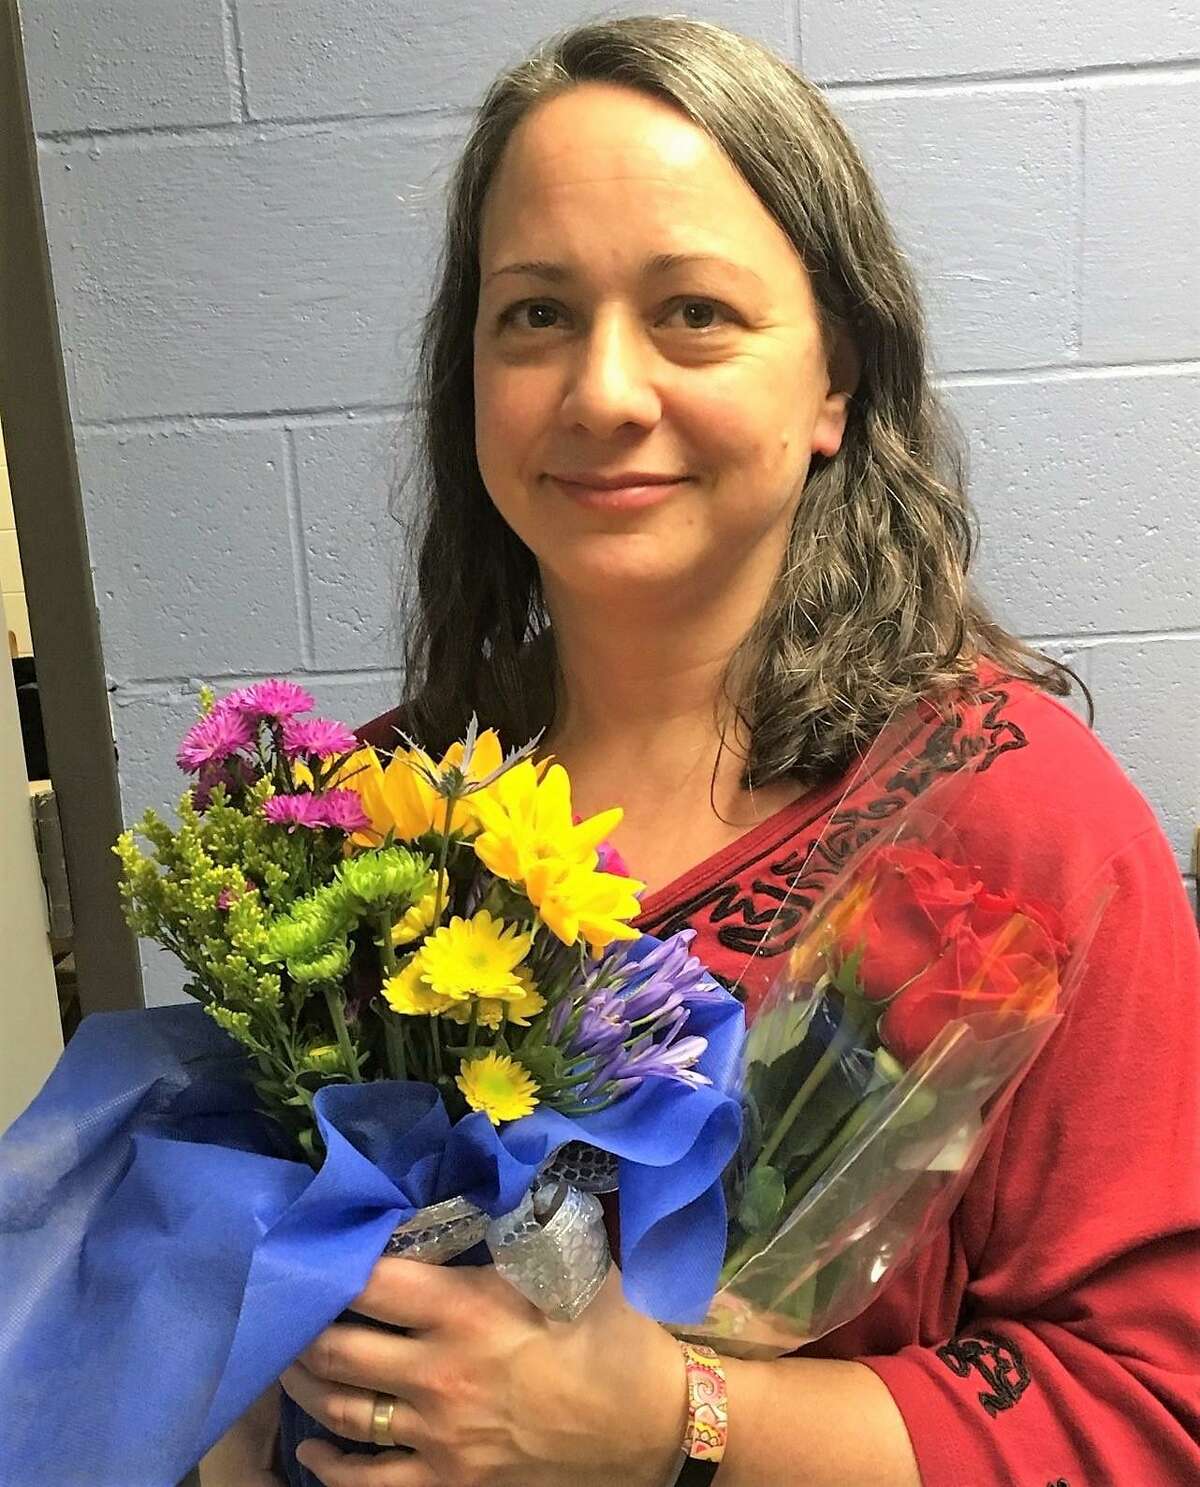 Robin Christopher has been named the Best Teacher of the Year for Regional School District No. 6.